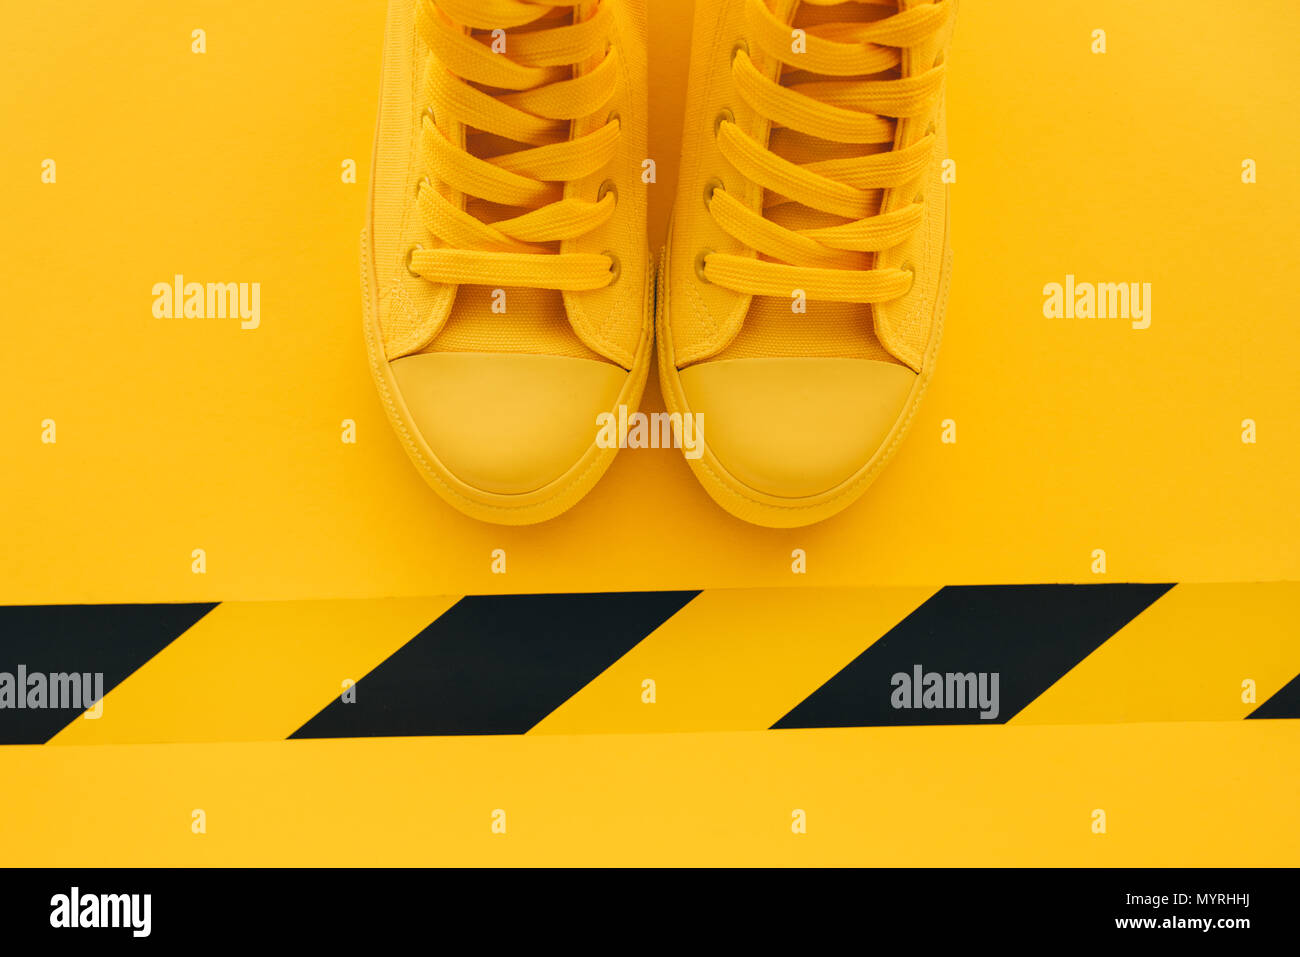 First in line young man queueing, conceptual overhead top view image of yellow sneakers waiting in line Stock Photo